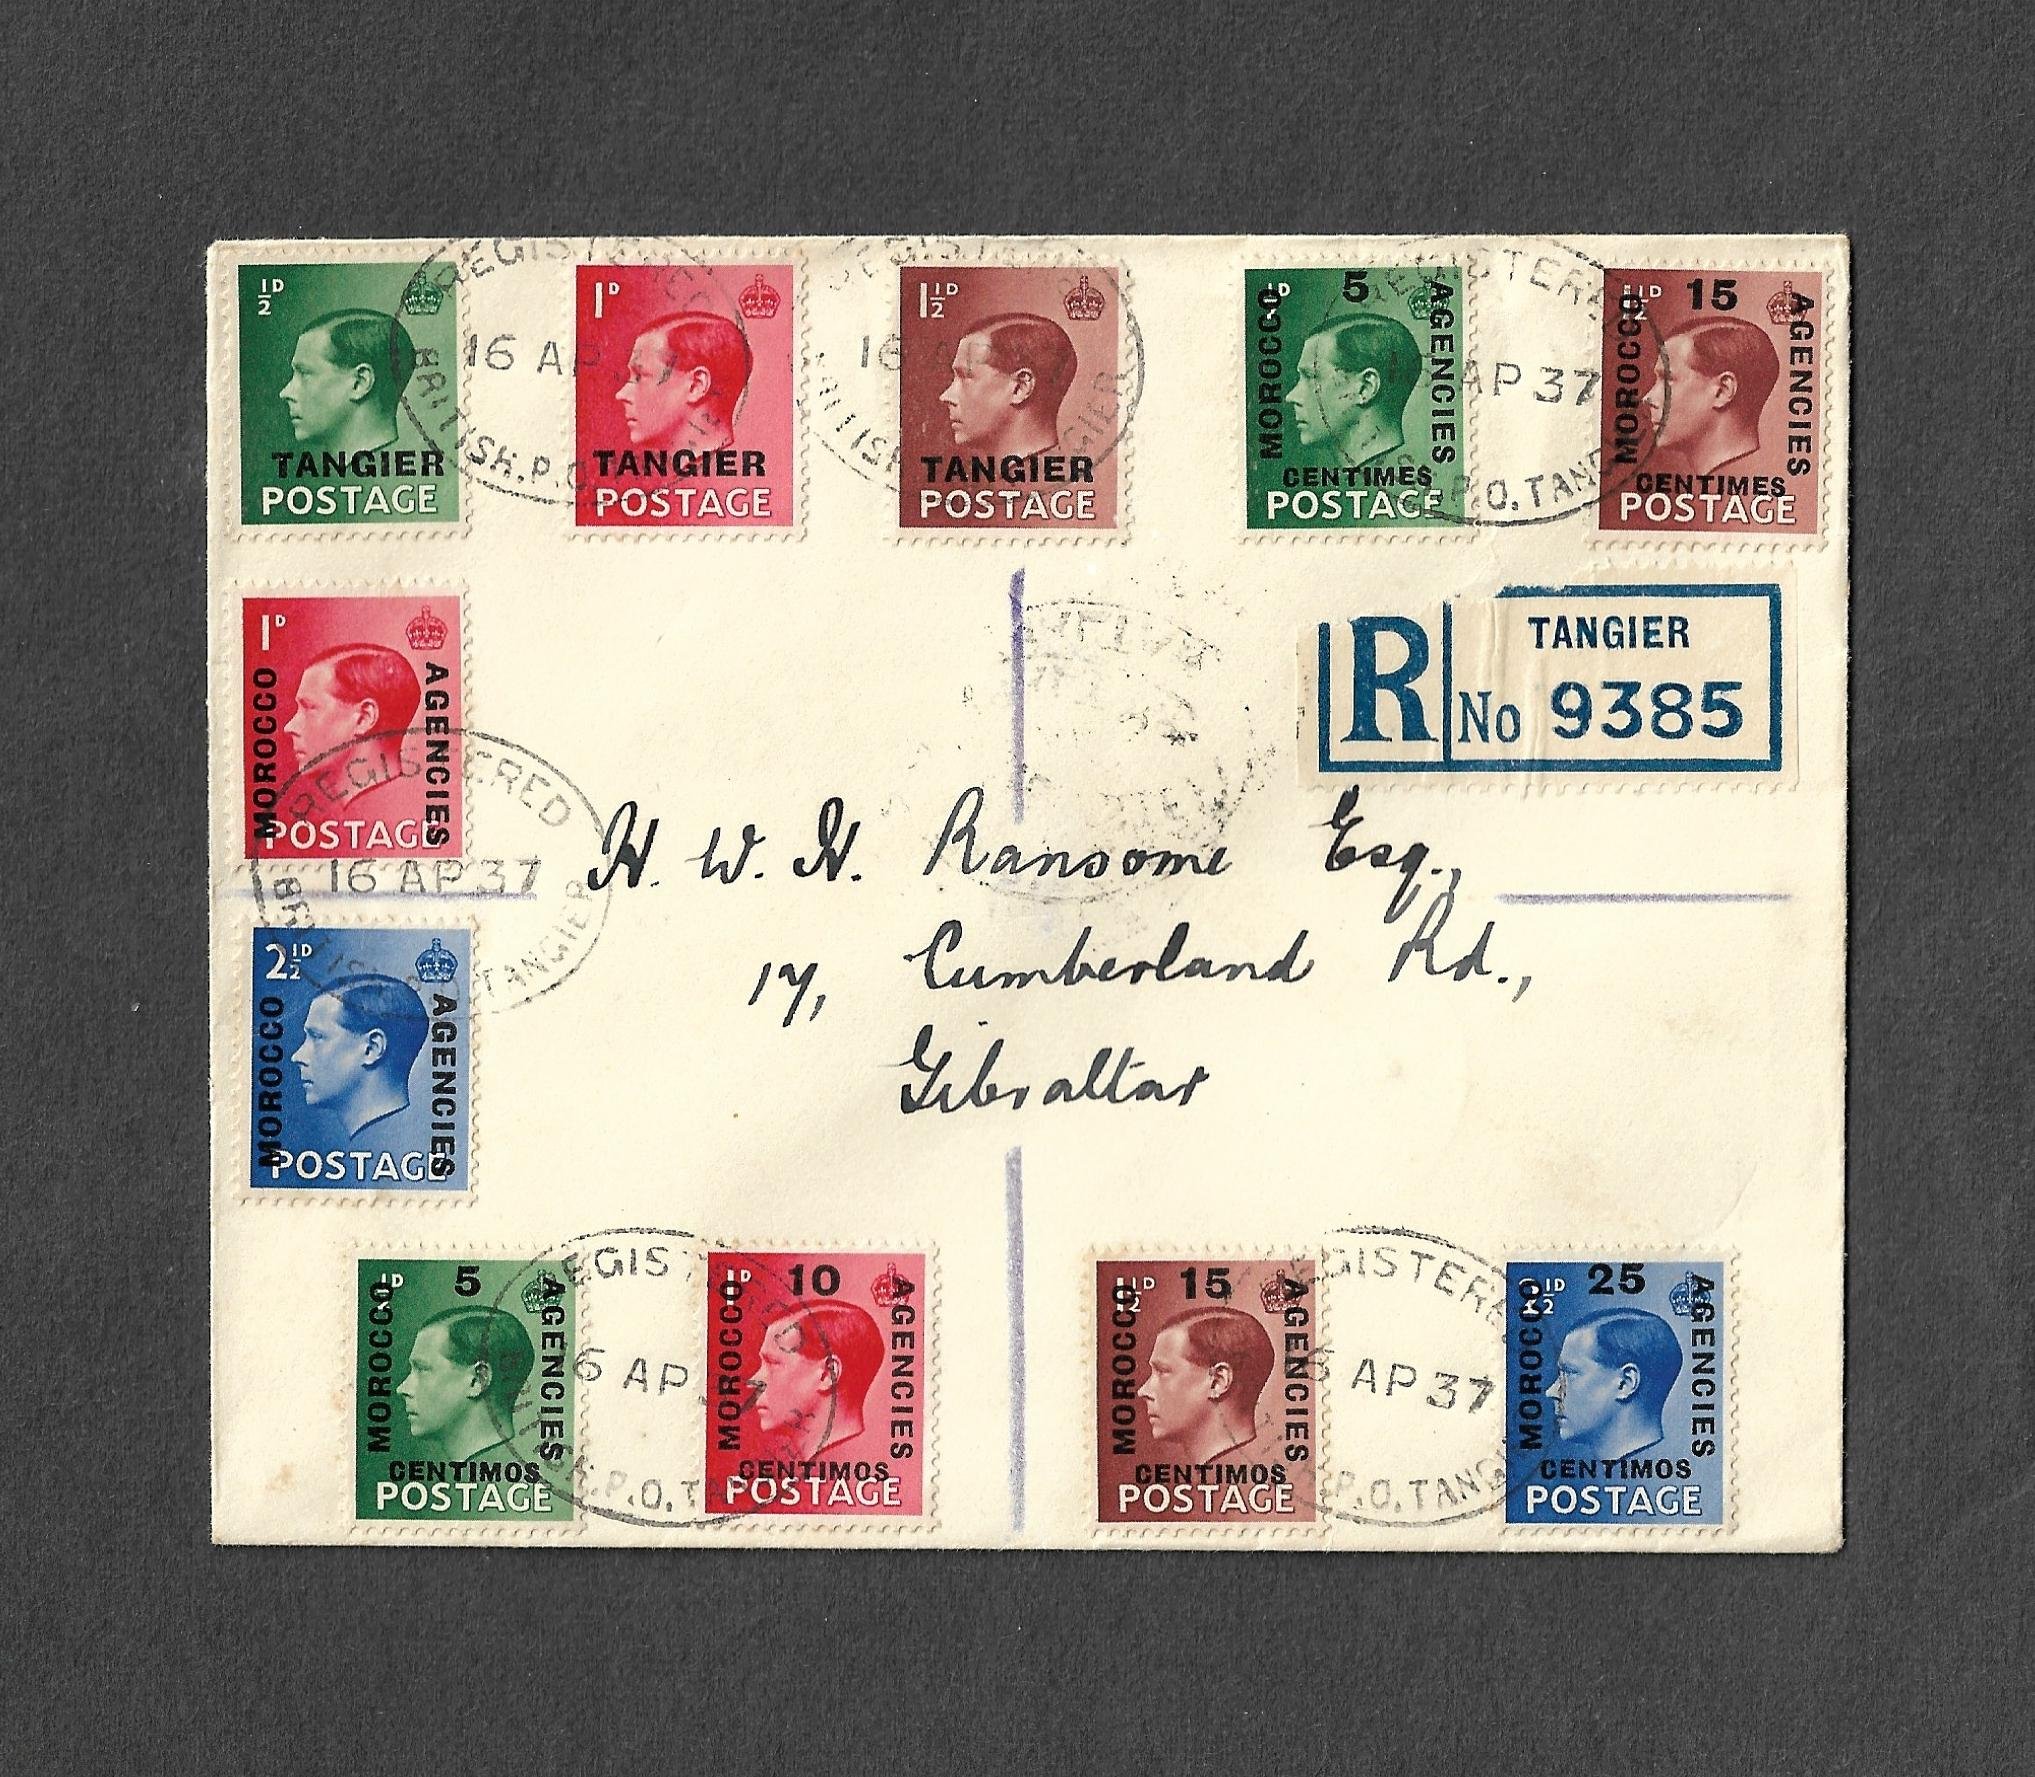 A 1937 Edward VIII Registered Cover in good condition.